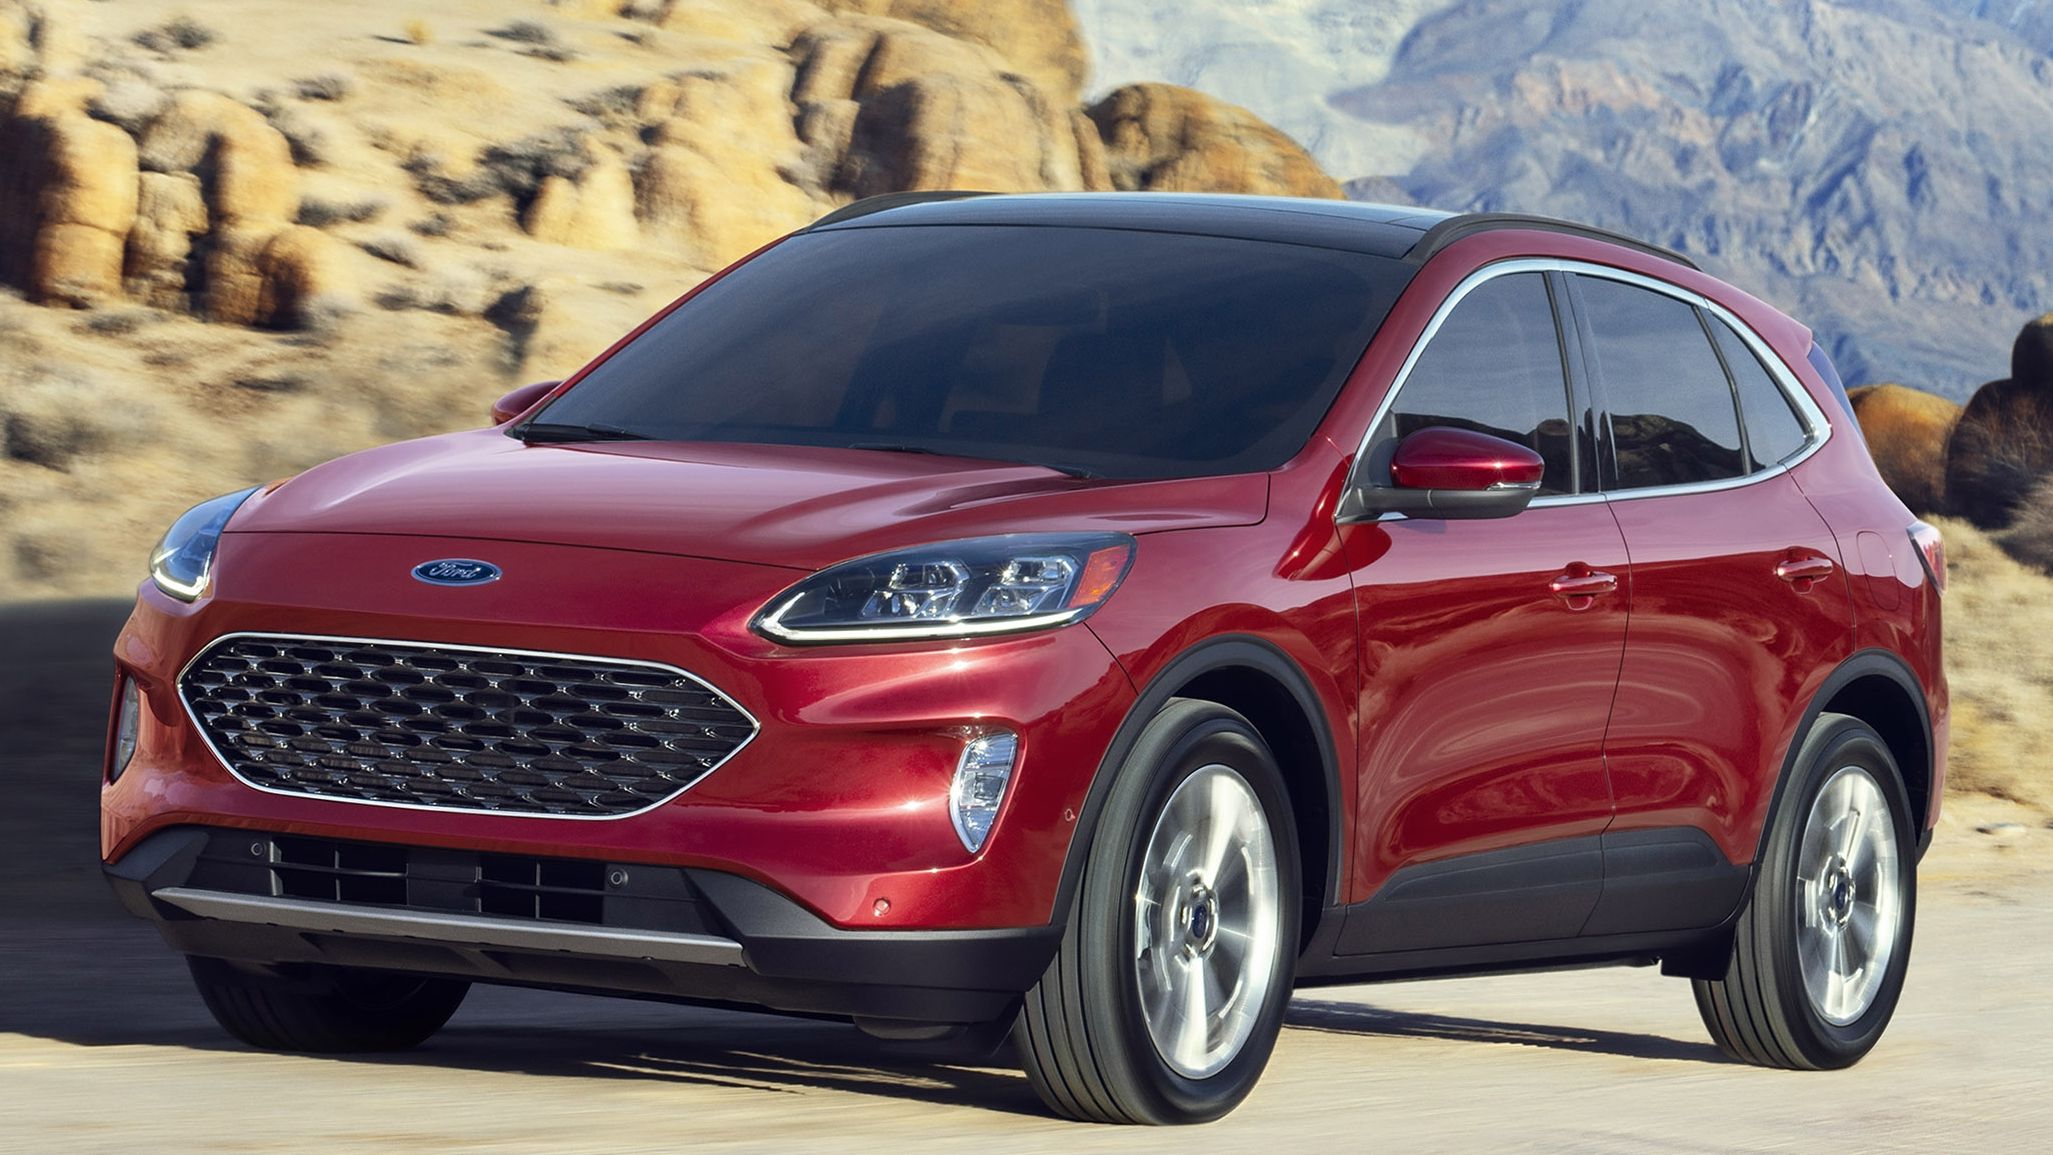 2020 Ford Urban Escape by LGE-CTS